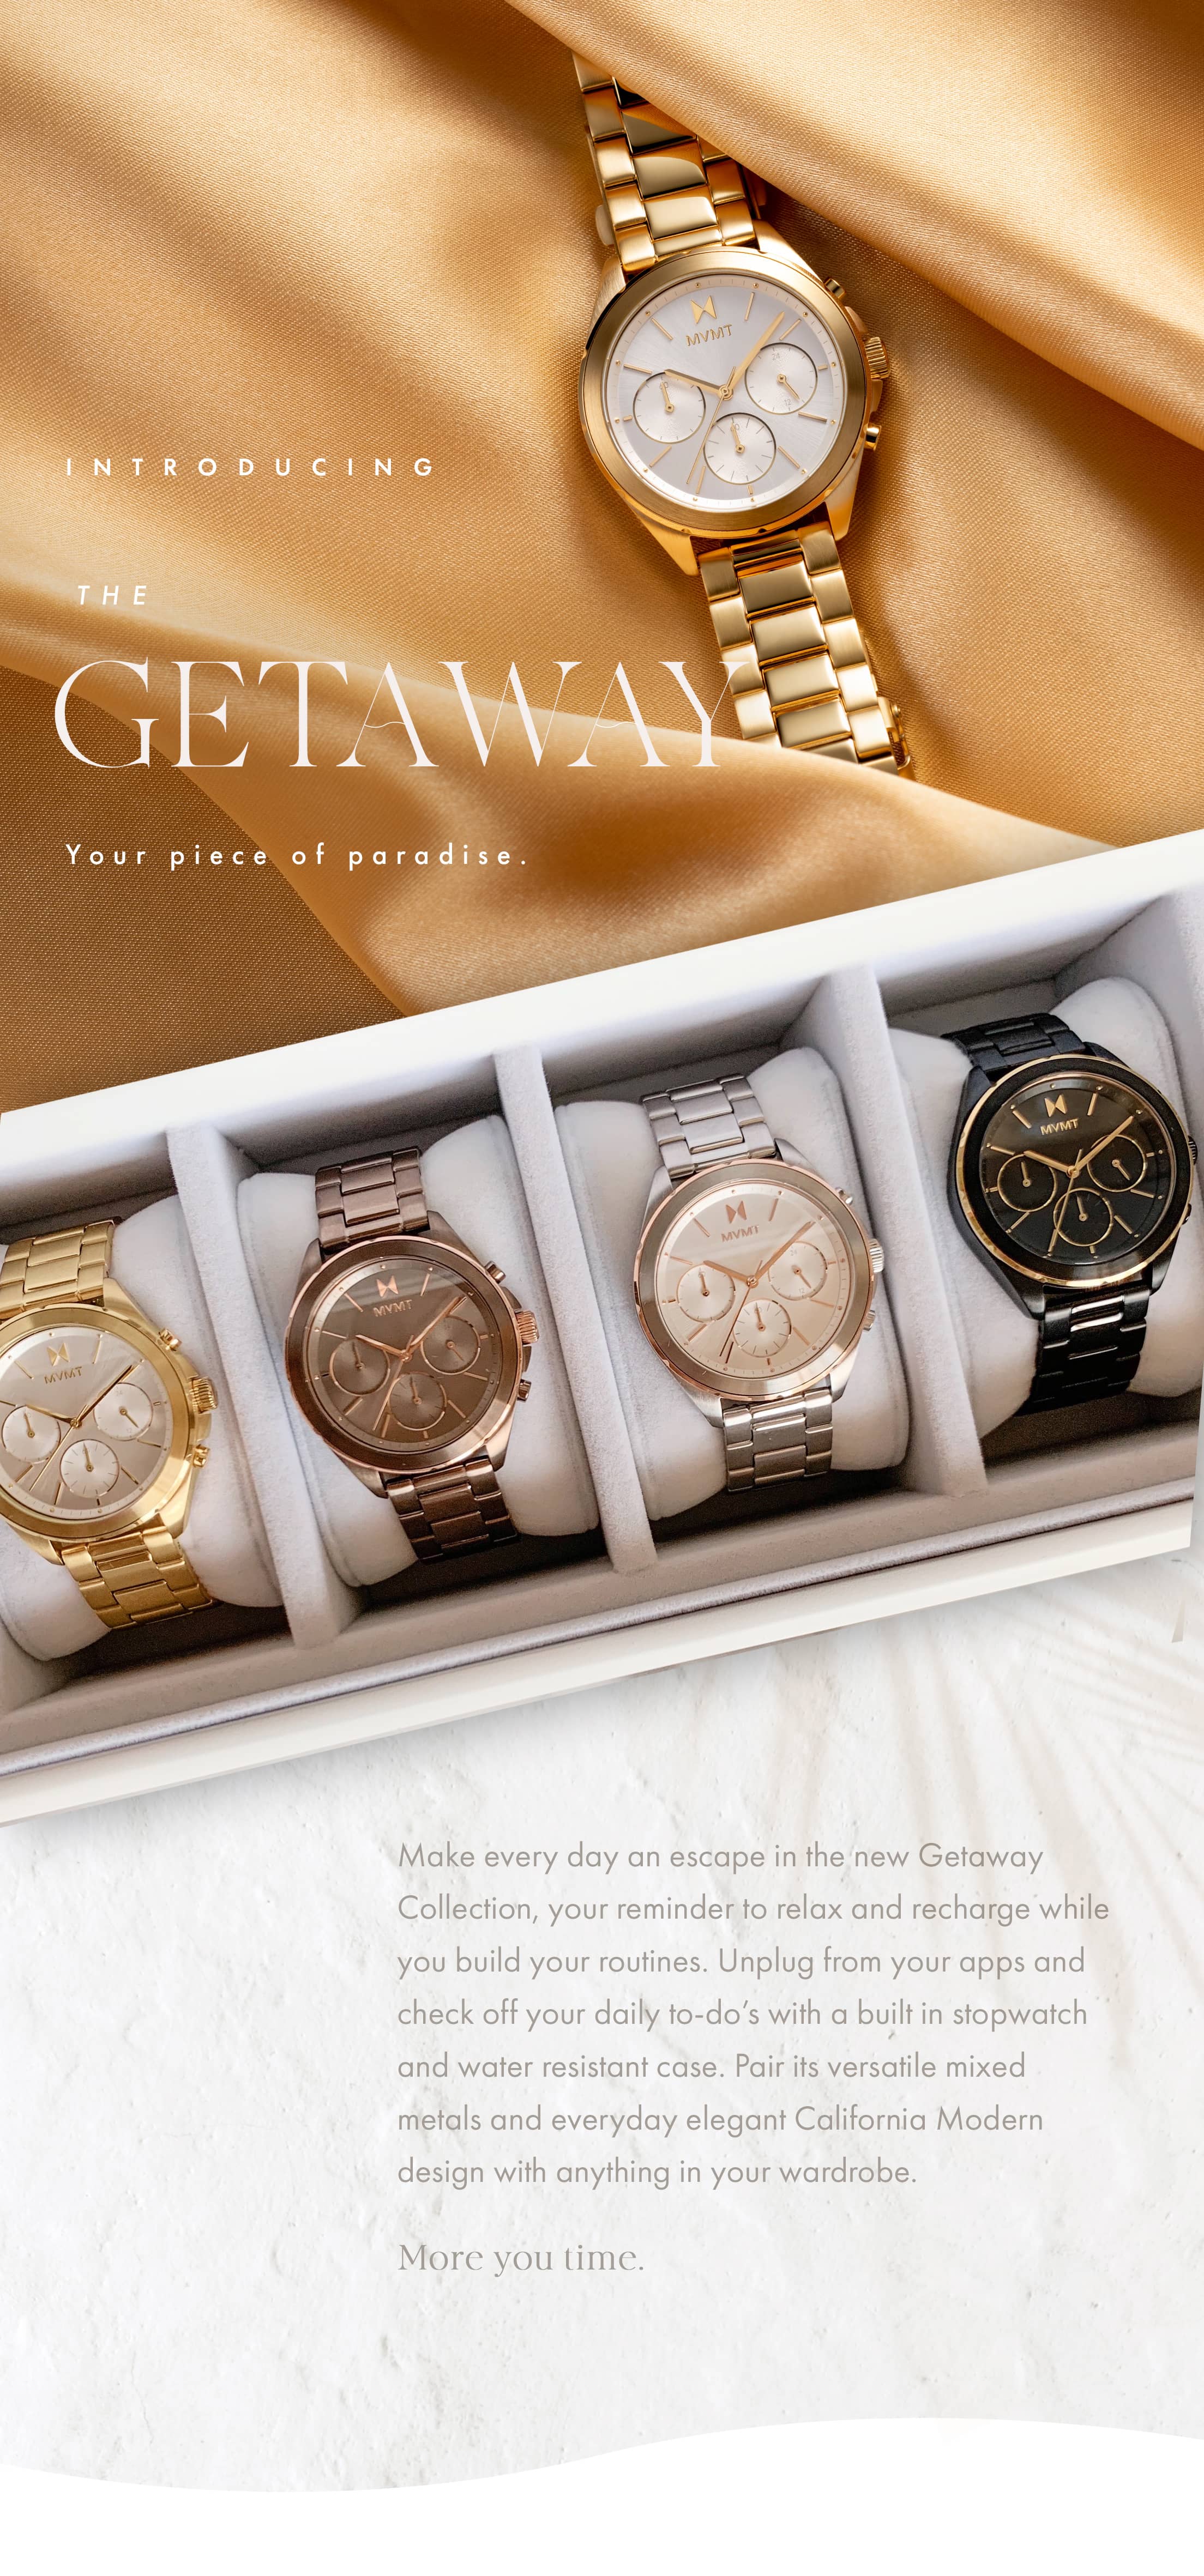 Introducing the Getaway. Your piece of paradise. Make every day an escape in the new Getaway Collection, your reminder to relax and recharge while you build your routines. Unplug from your apps and check off your daly to do-s with a built in stopwatch and water resistant case. Pair its versatile mixed metals and everyday elegant California Modern design with anything in your wardrobe. More you time.